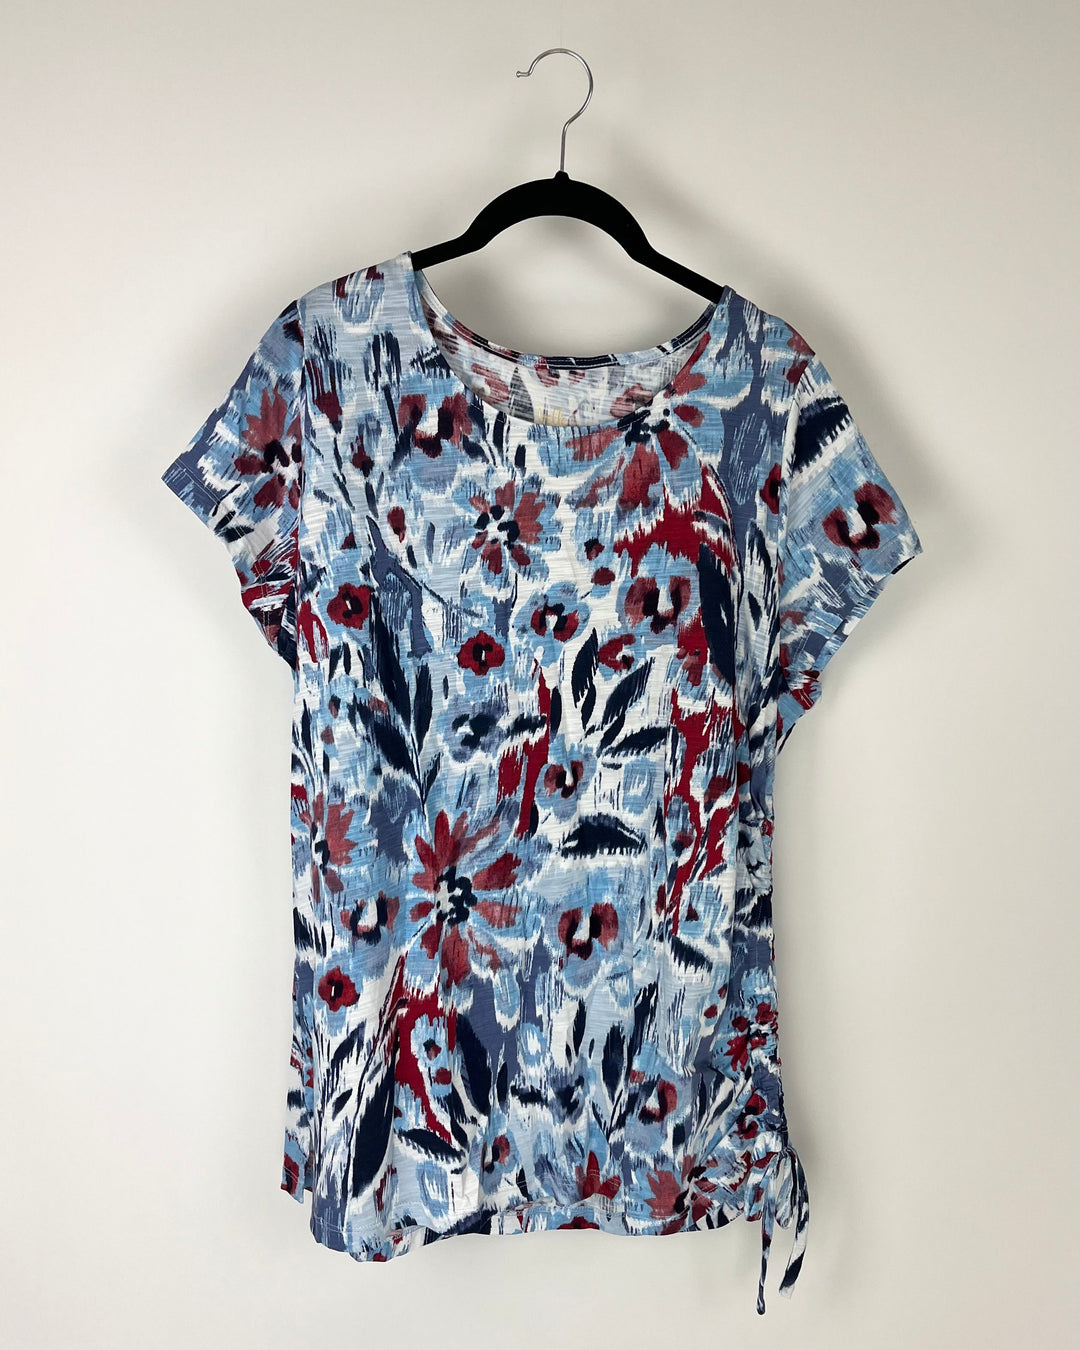 Blue and Red Floral Tie-Dye Top - Size 14-16